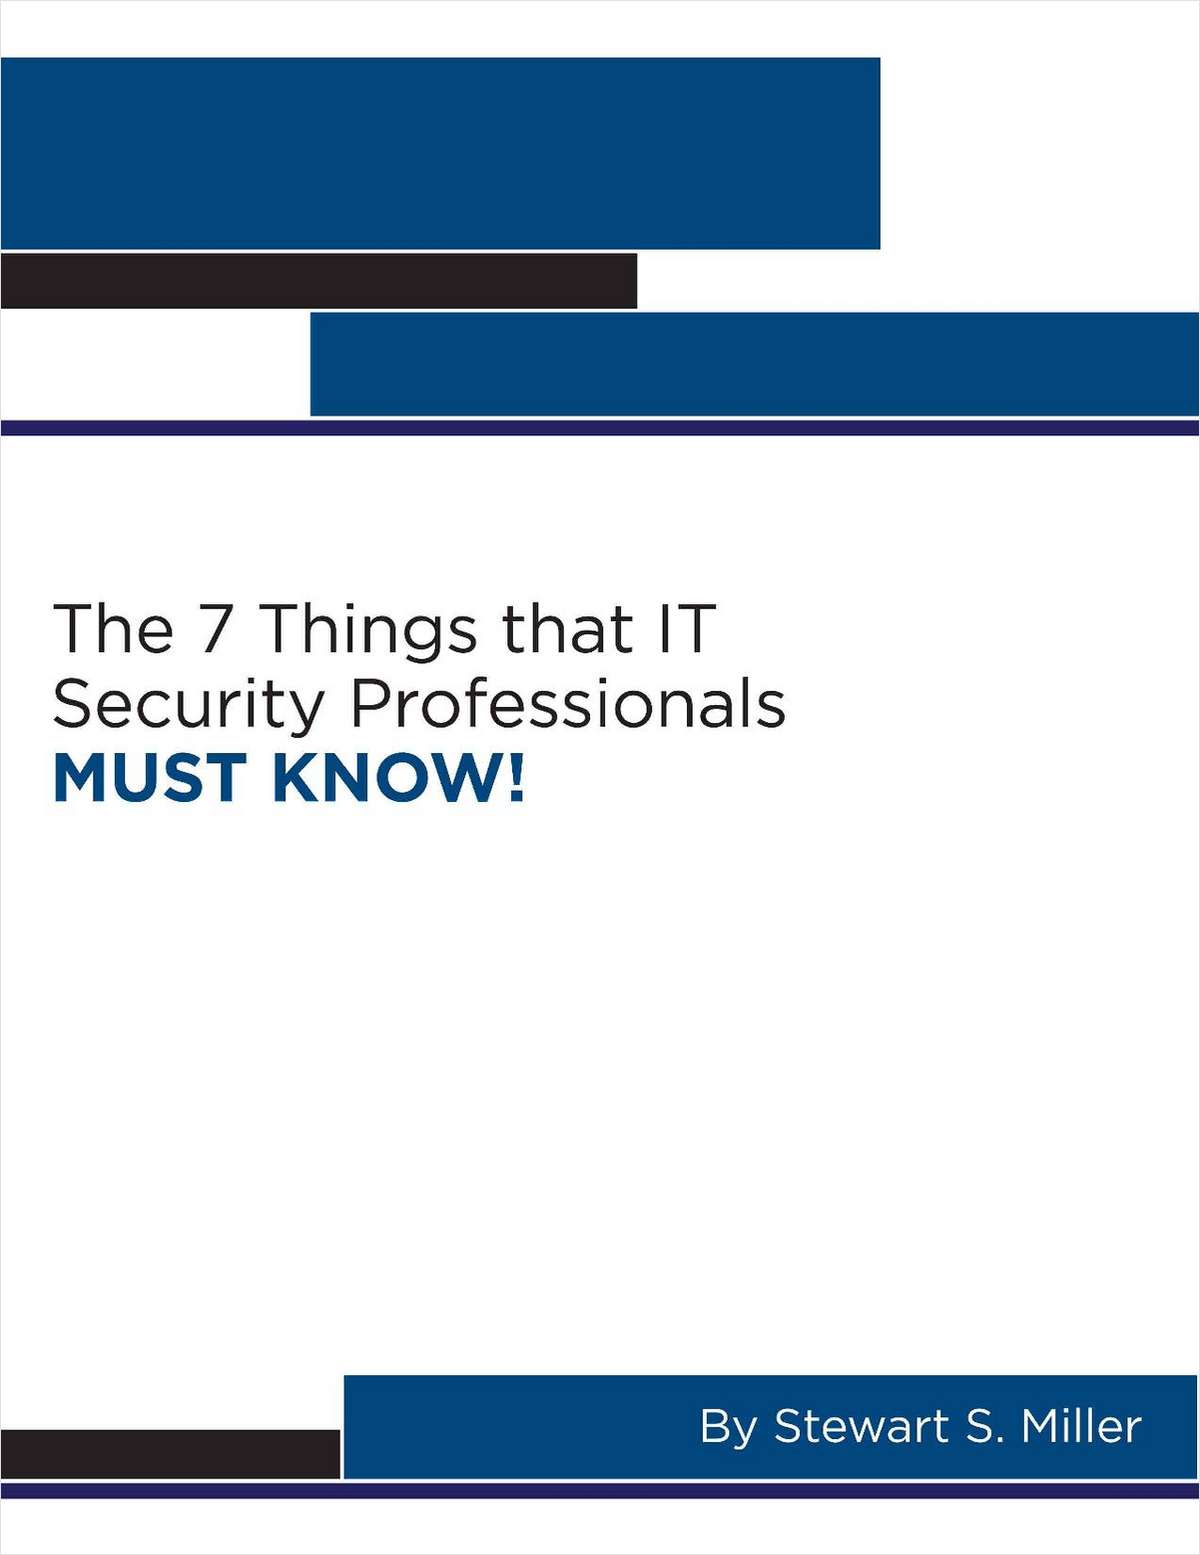 The 7 Things that IT Security Professionals MUST KNOW!